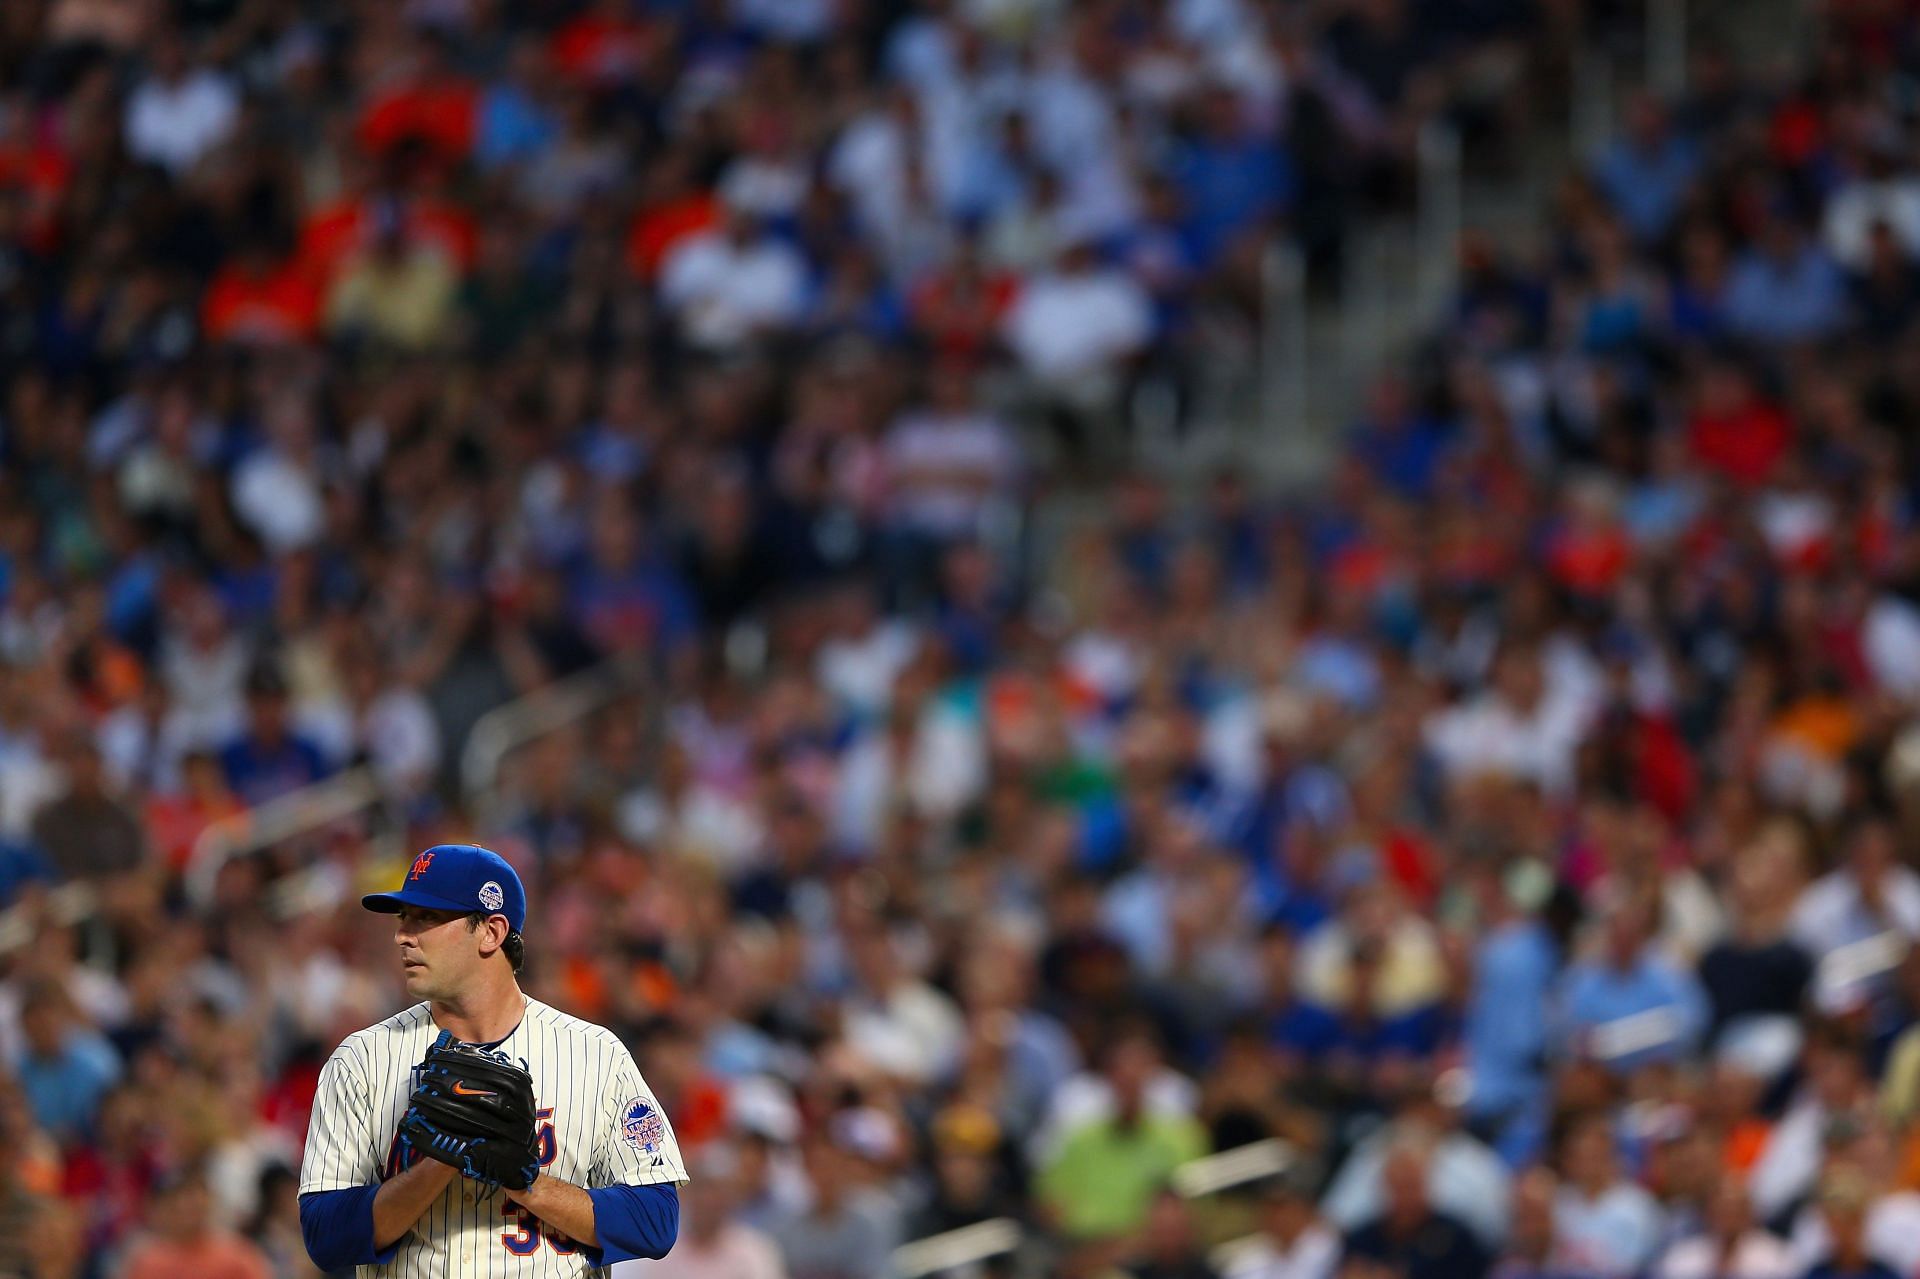 Matt Harvey has pitched well for Team Italy in the World Baseball